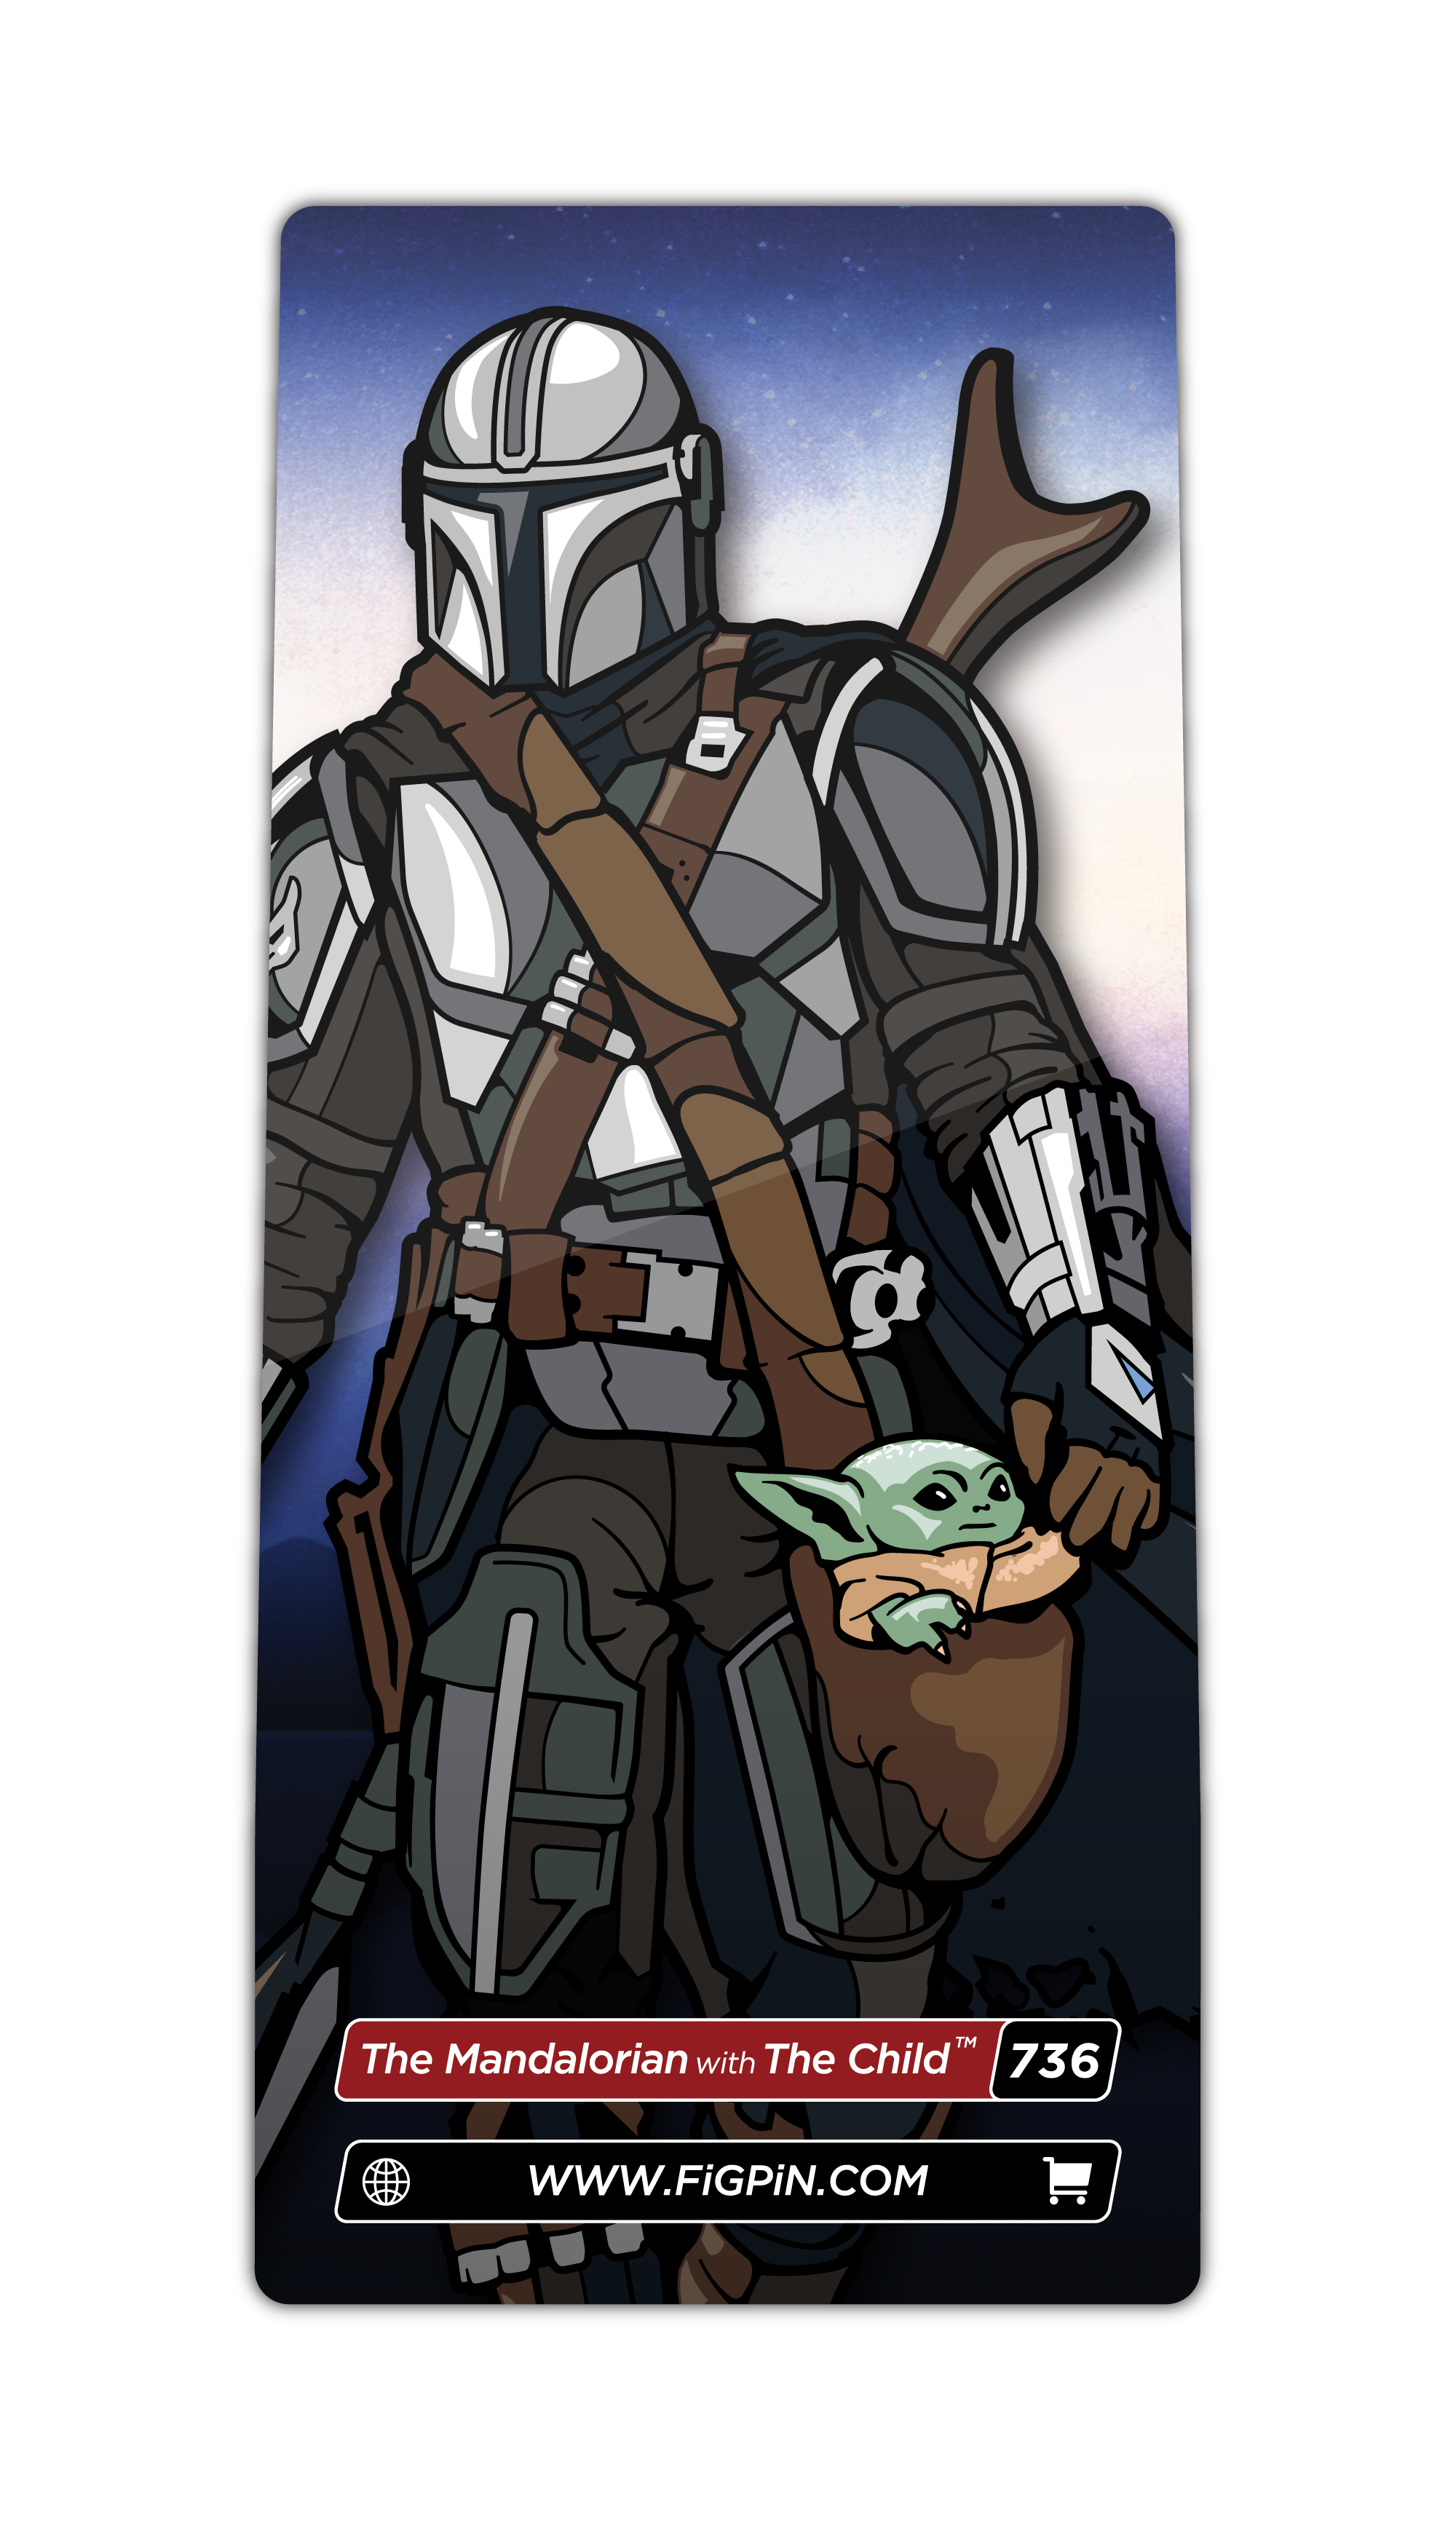 The Mandalorian with The Child (736)